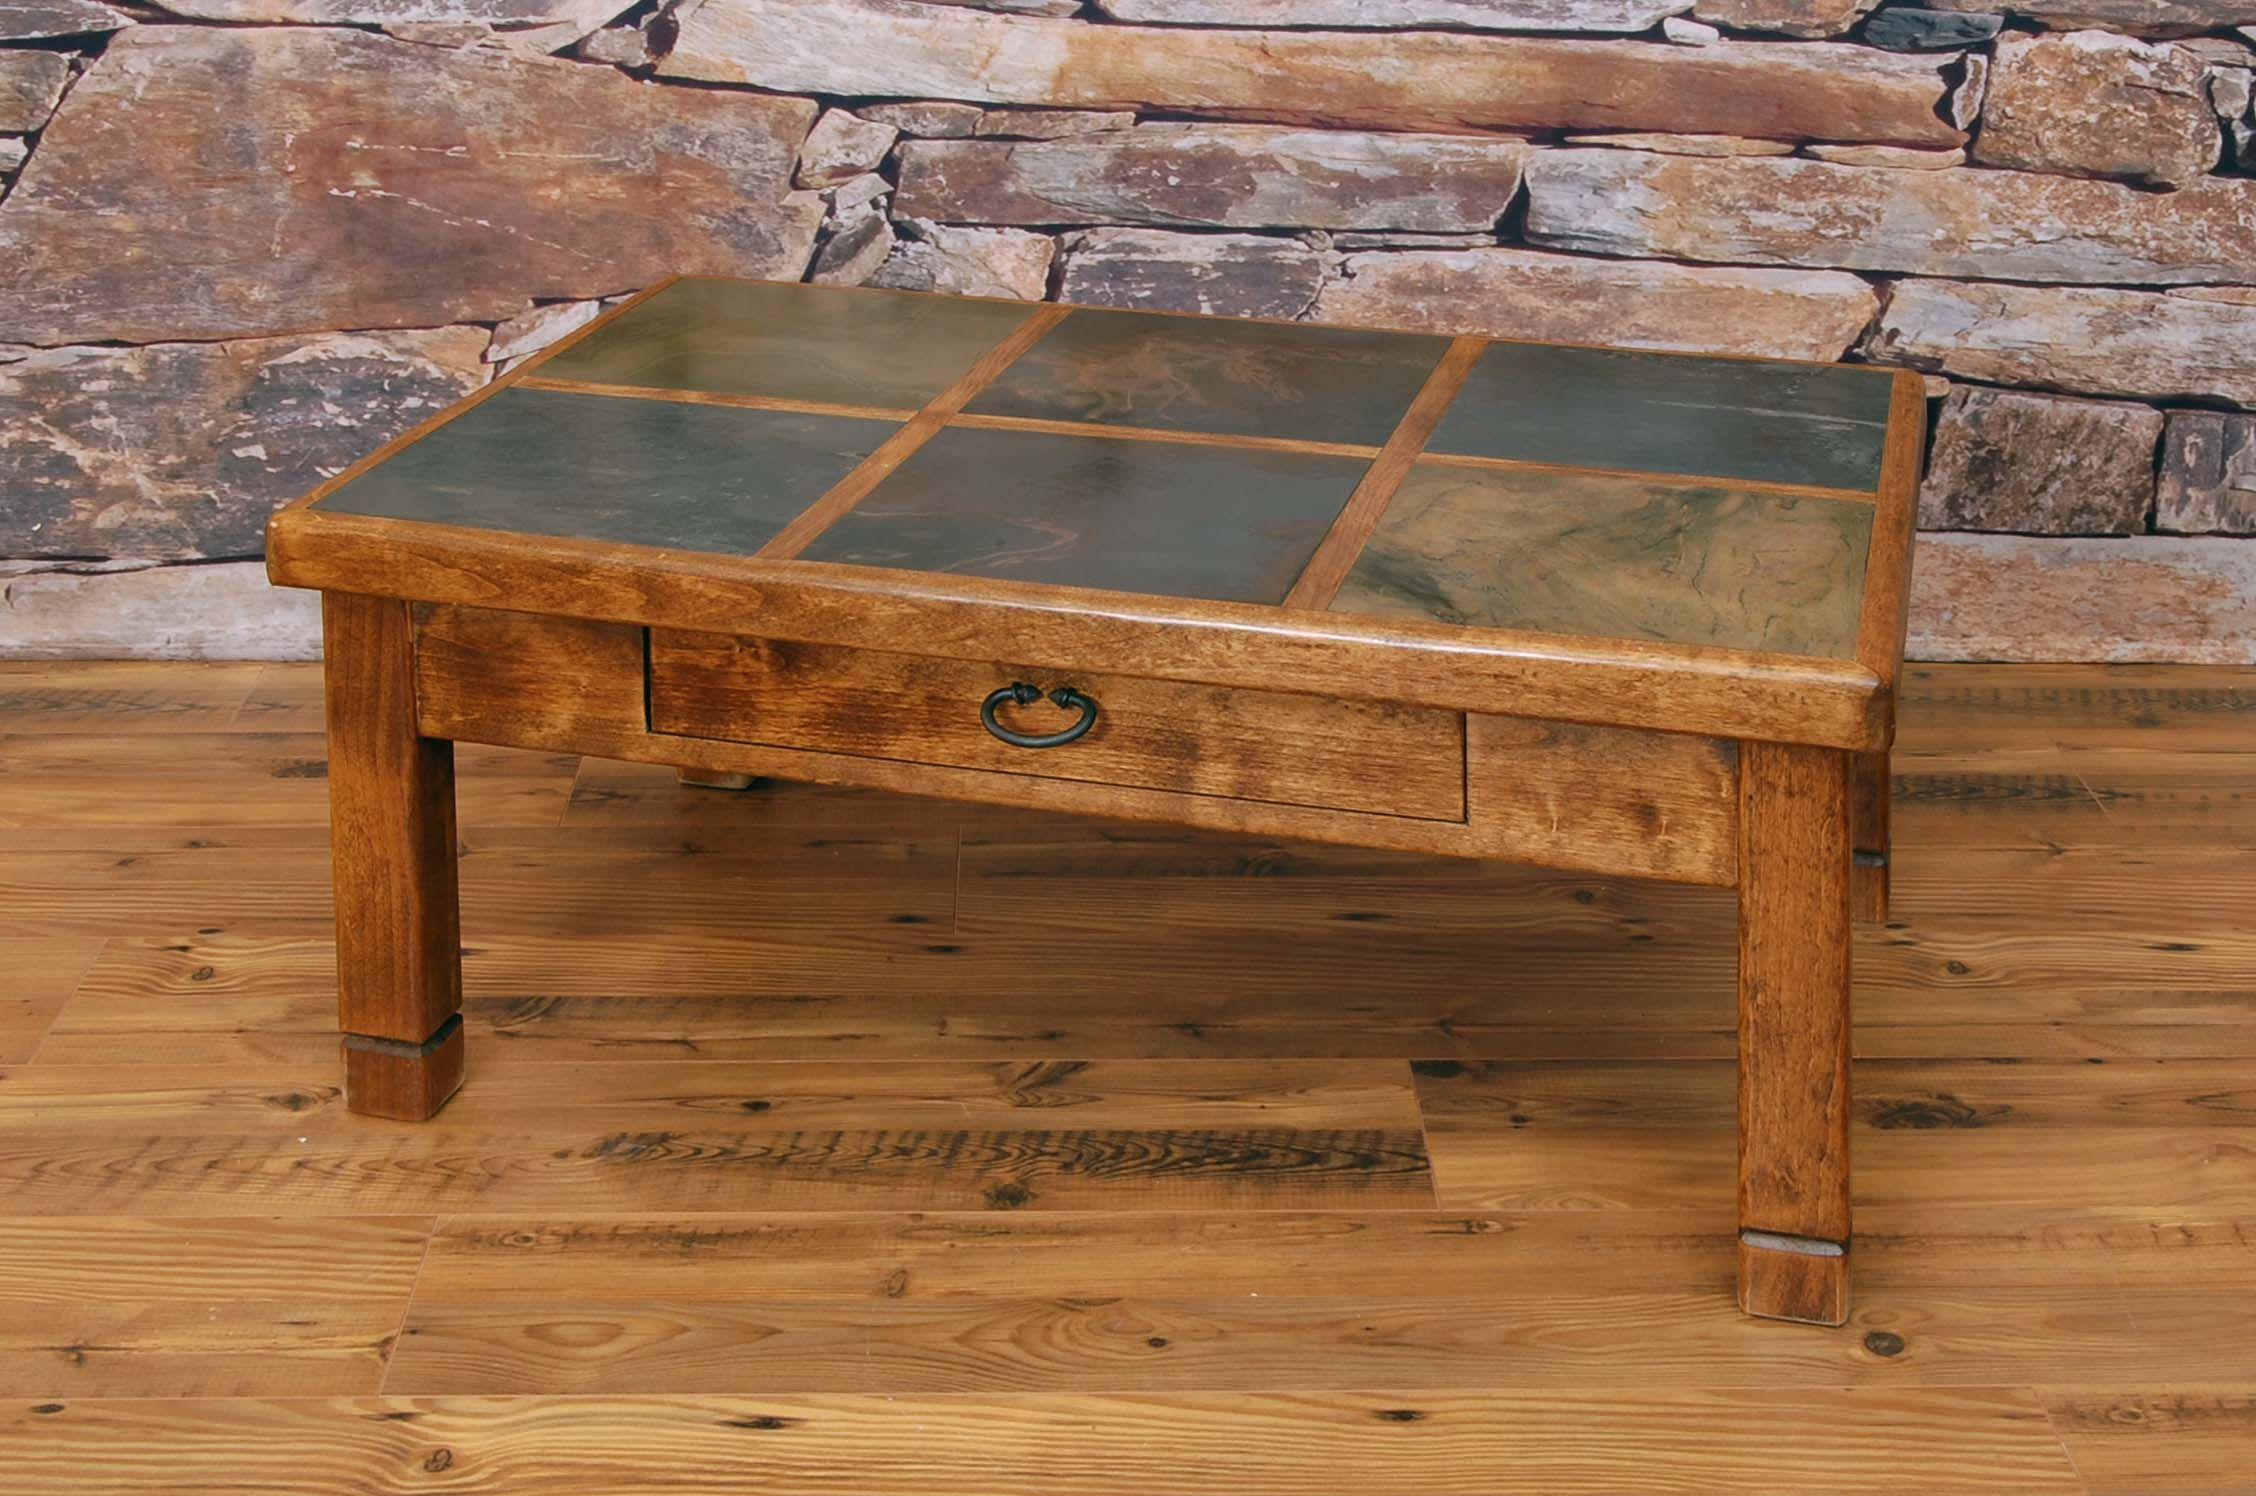 Wood And Slate Coffee Table Hipenmoedernl in size 2256 X 1496